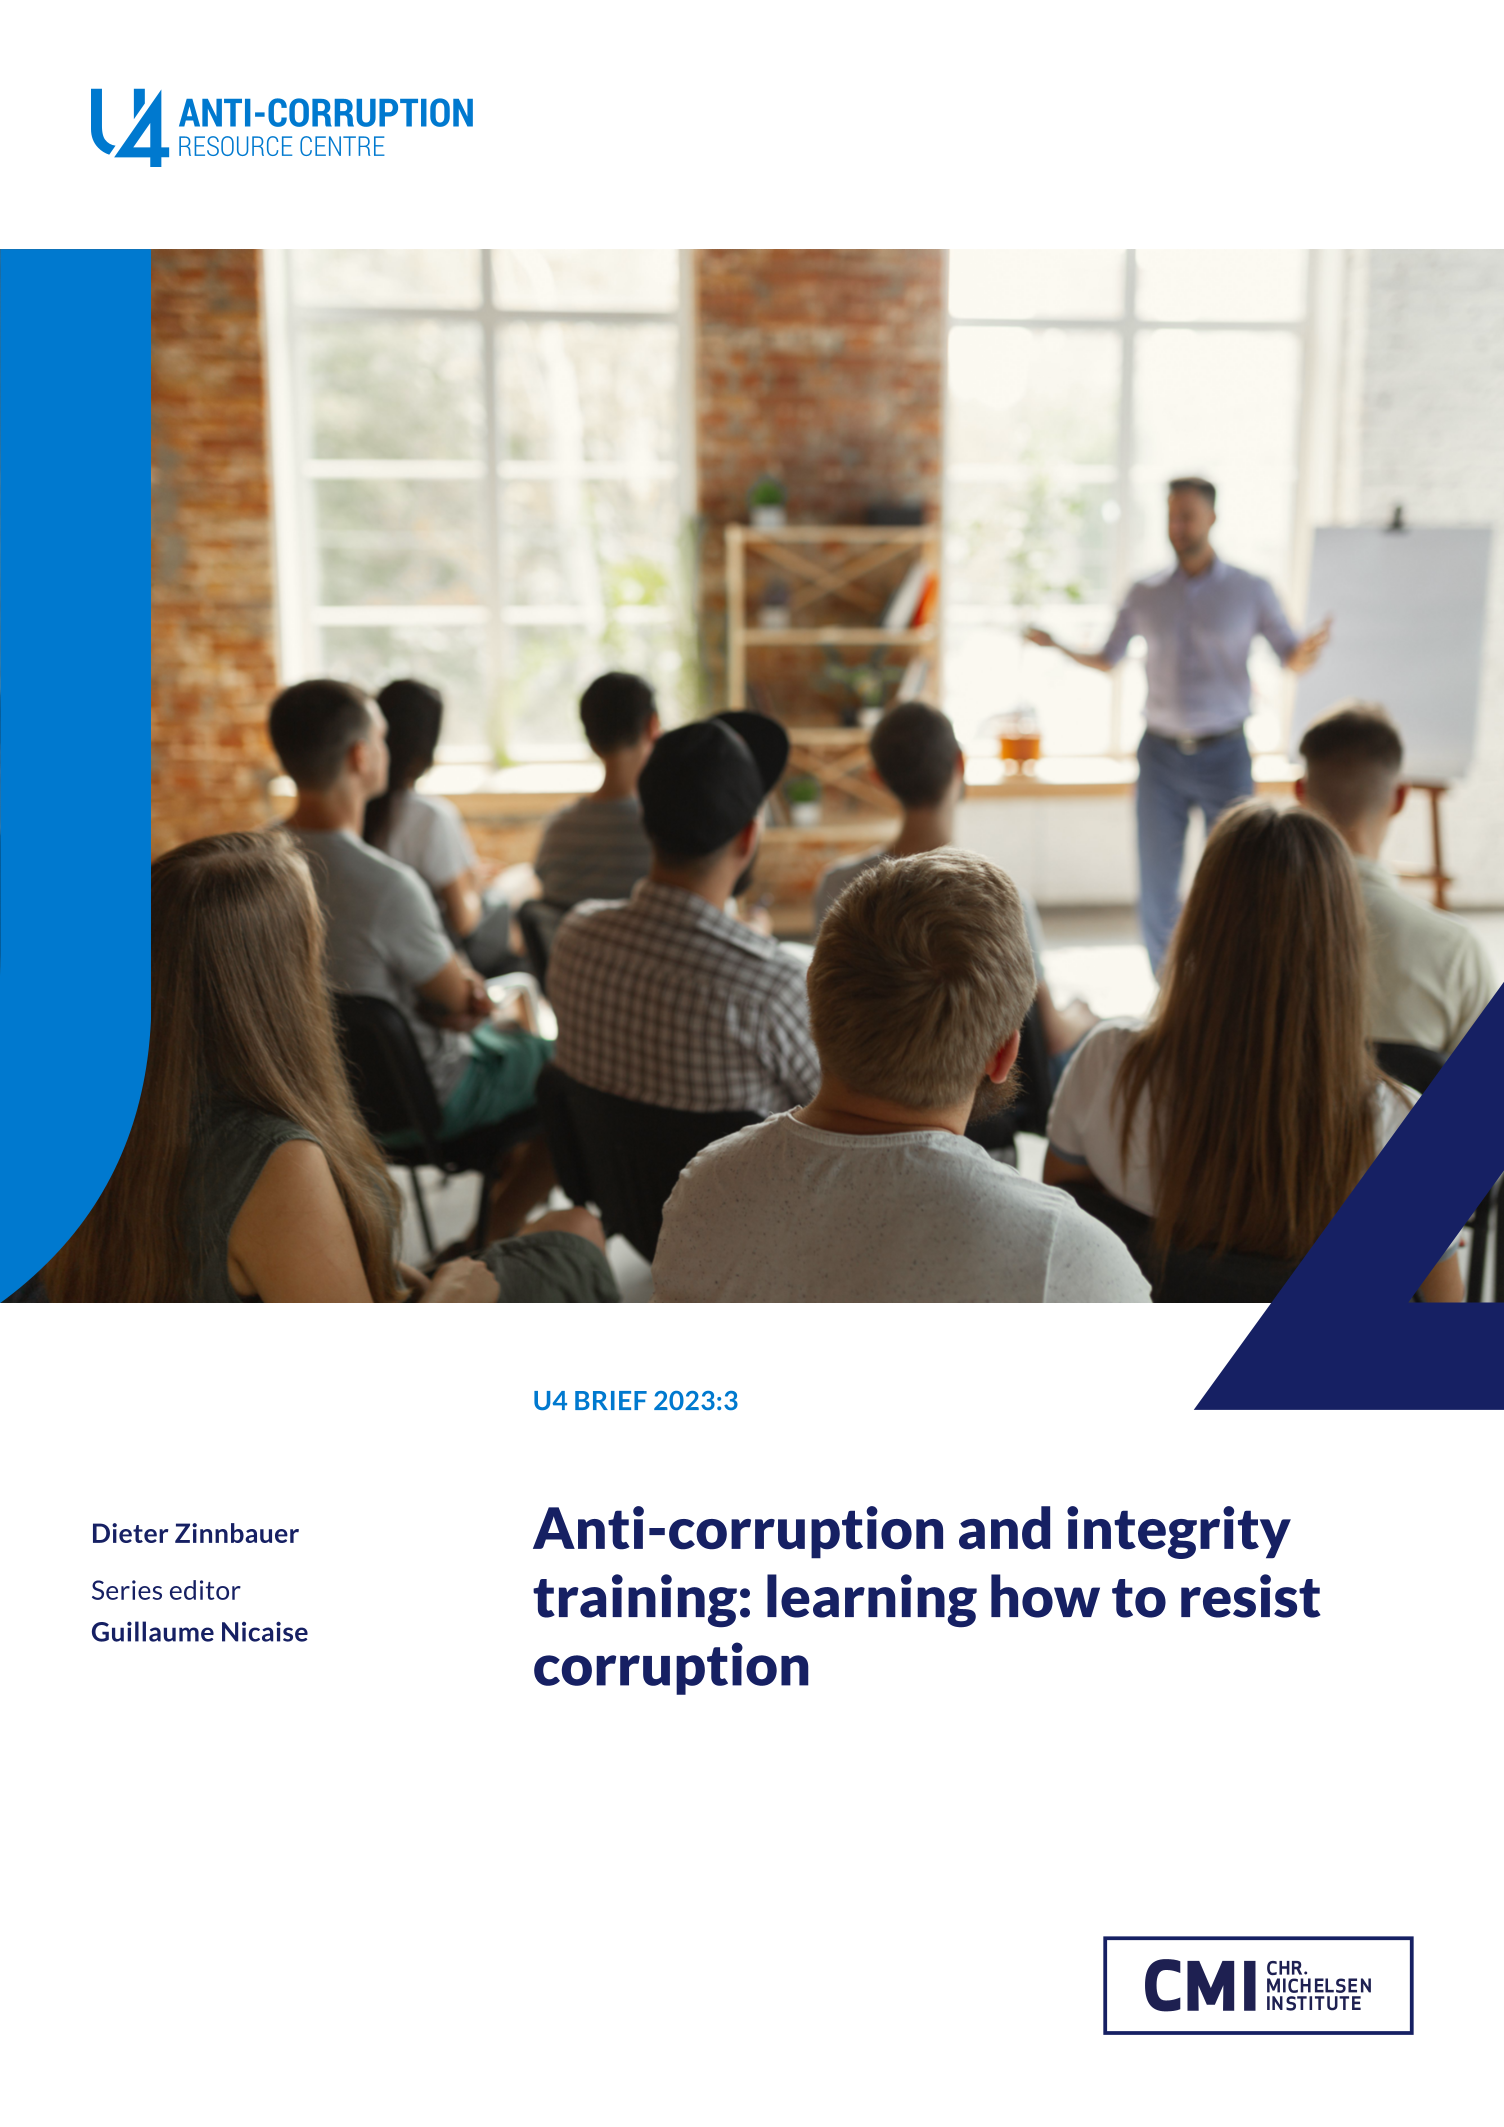 Anti-corruption and integrity training: learning how to resist corruption